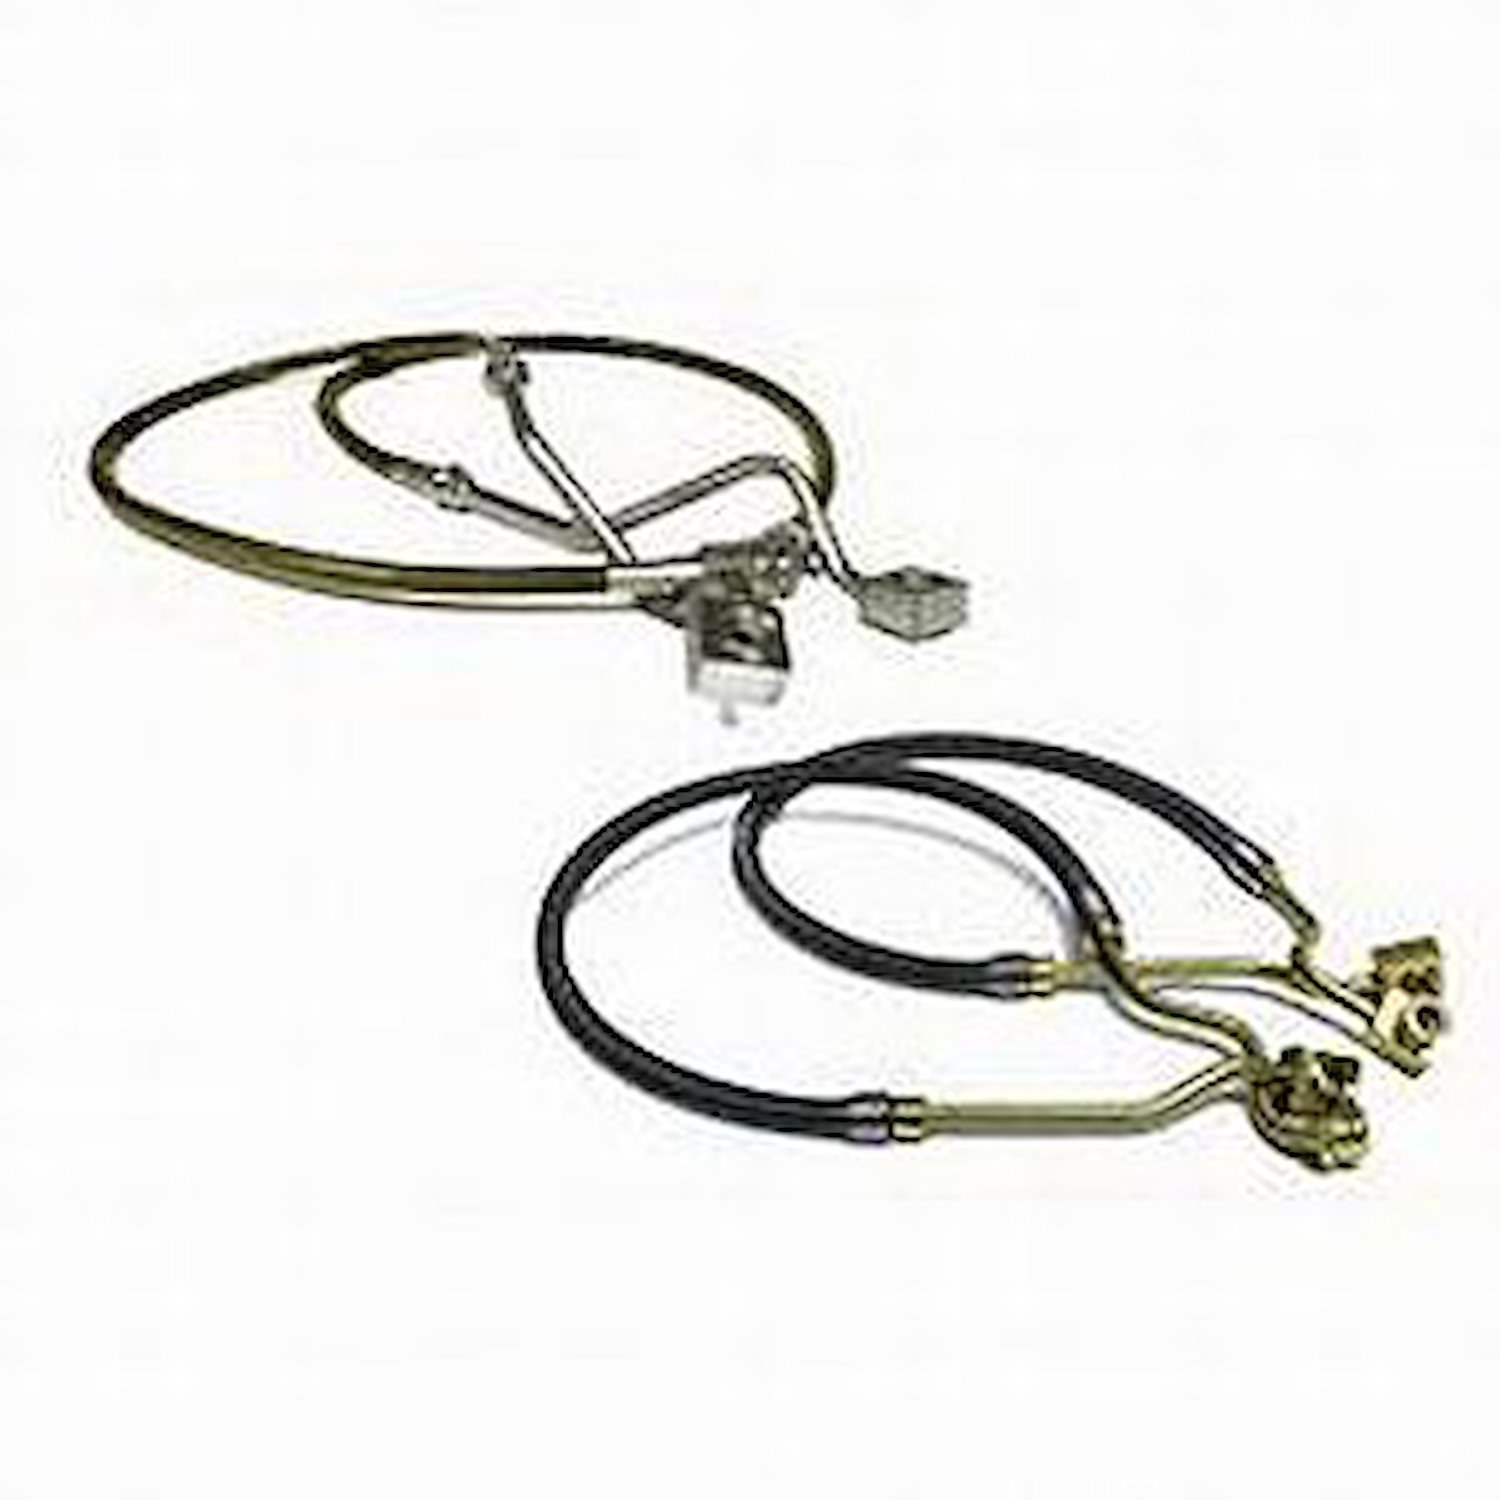 Bullet Proof Kevlar  Brake Hose Front Reinforced Braided Stainless Steel Length Over Stock 4 in. Vehicles w/4-8 in. Lift